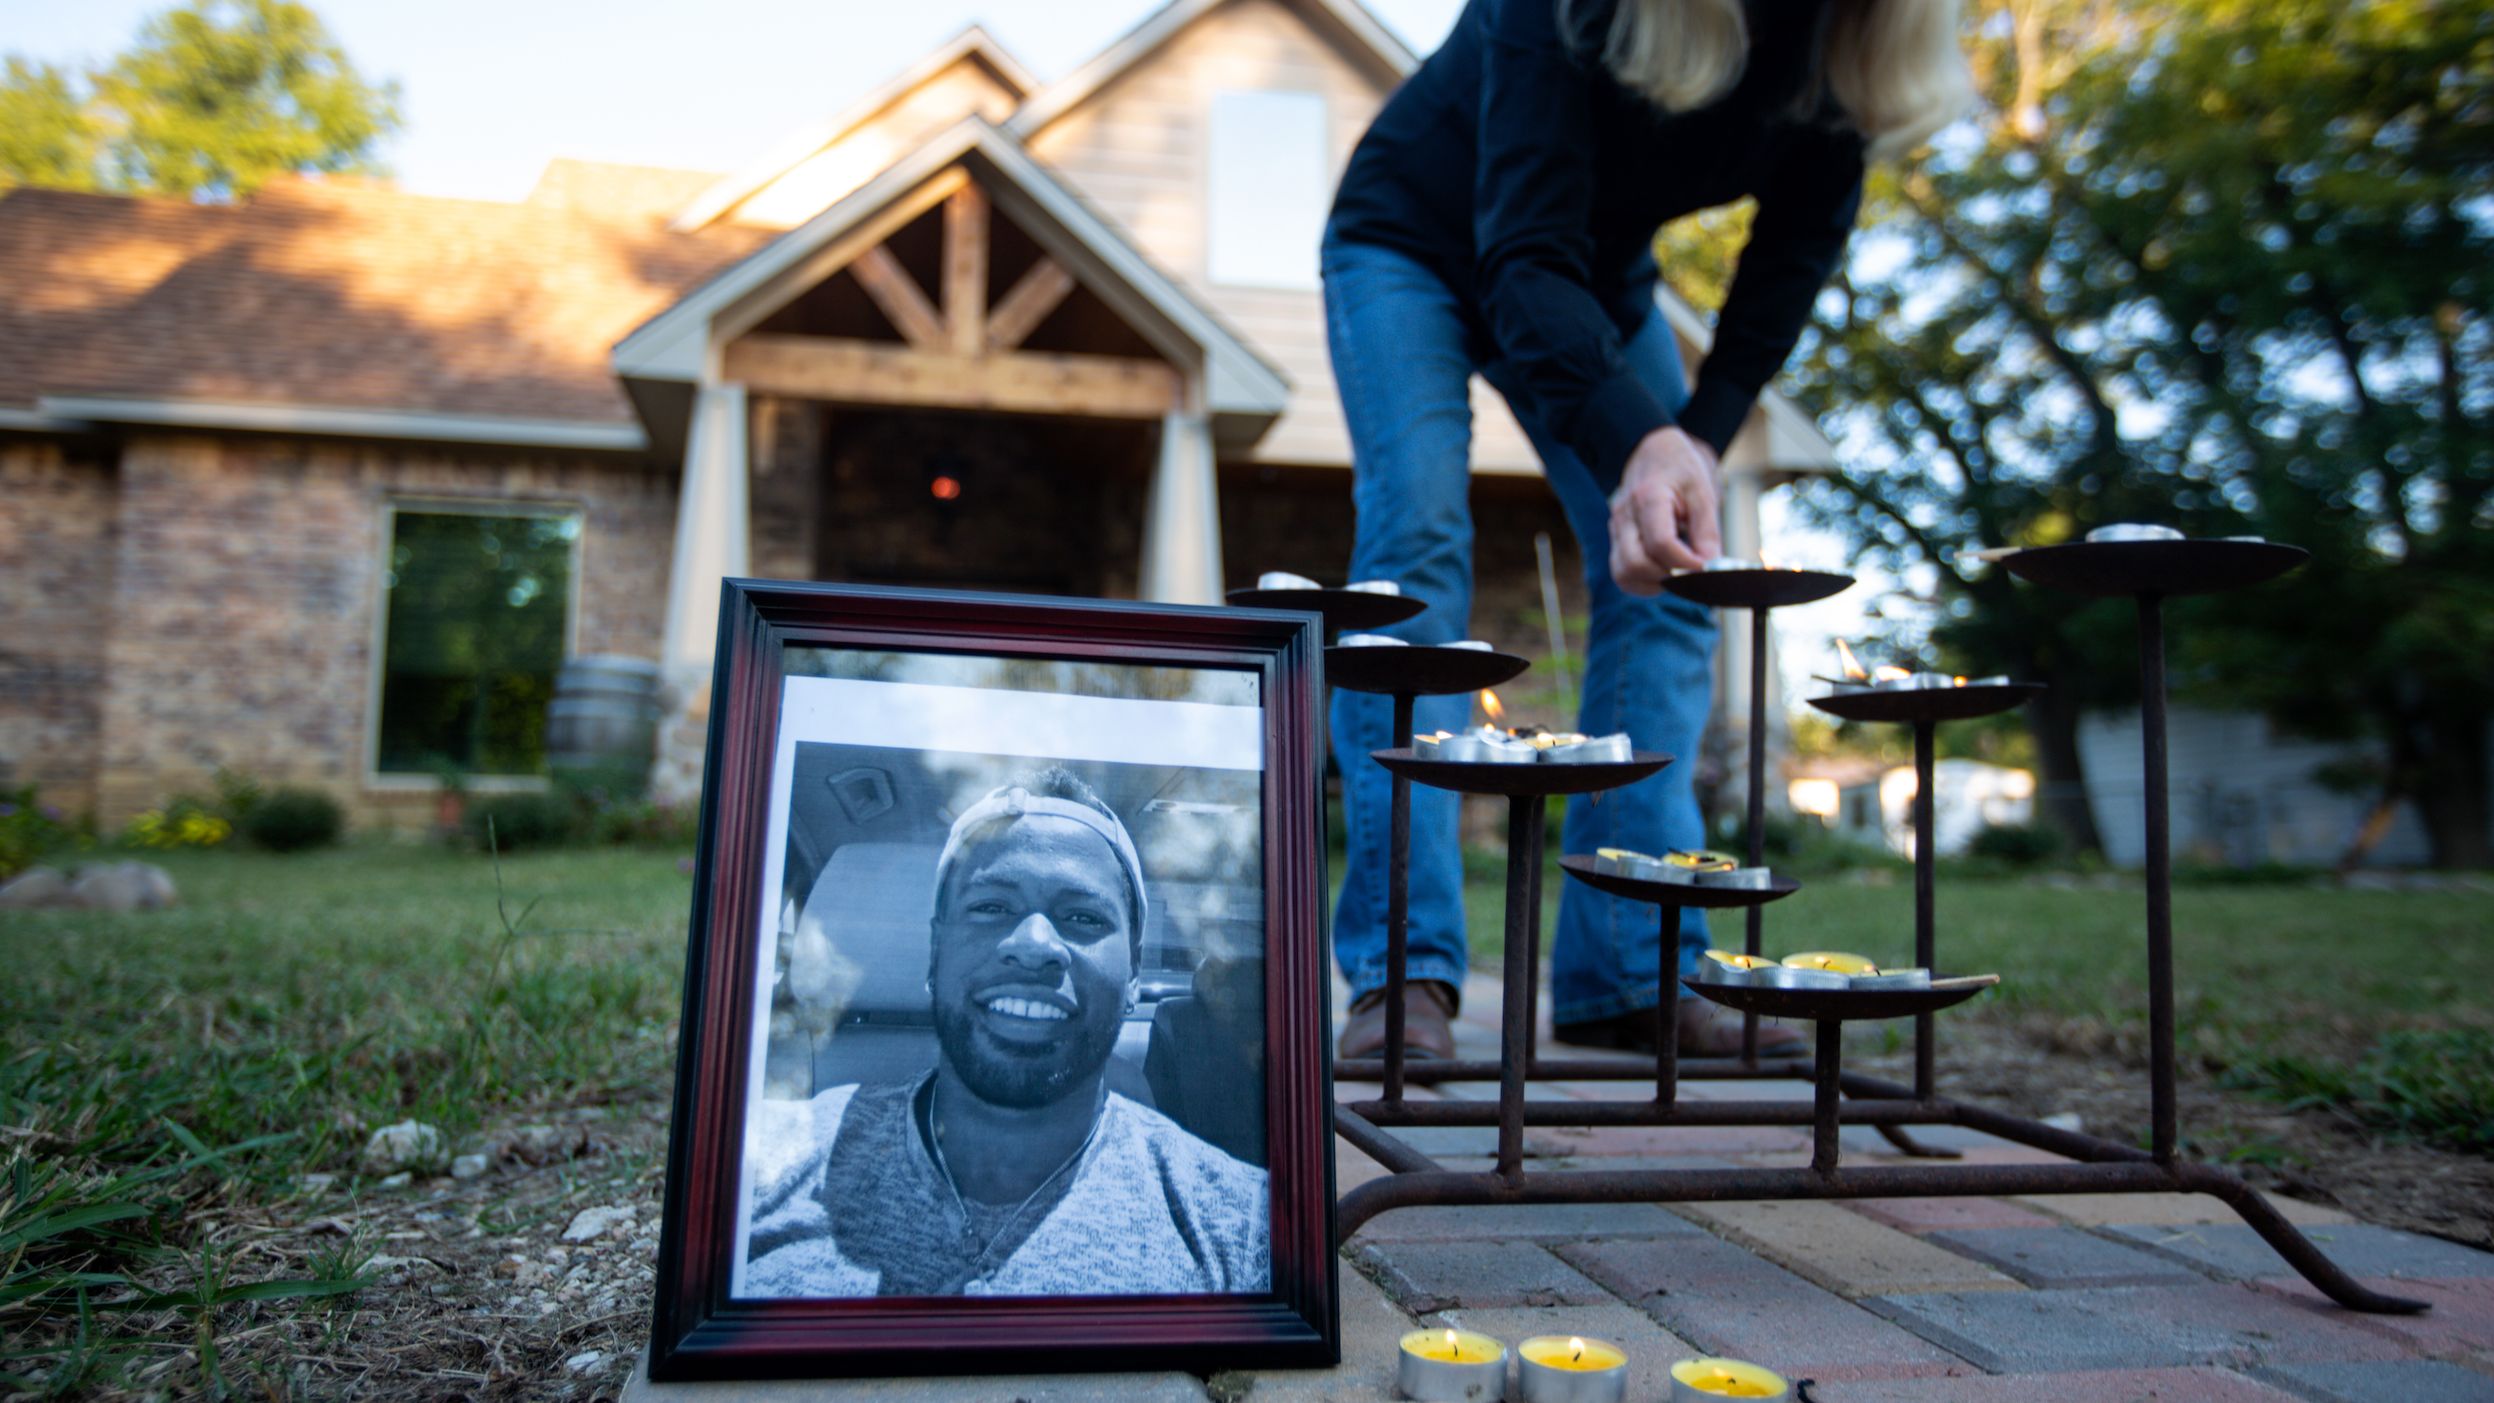 Jonathan Price was shot and killed almost two years ago while unarmed at a convenience store. 